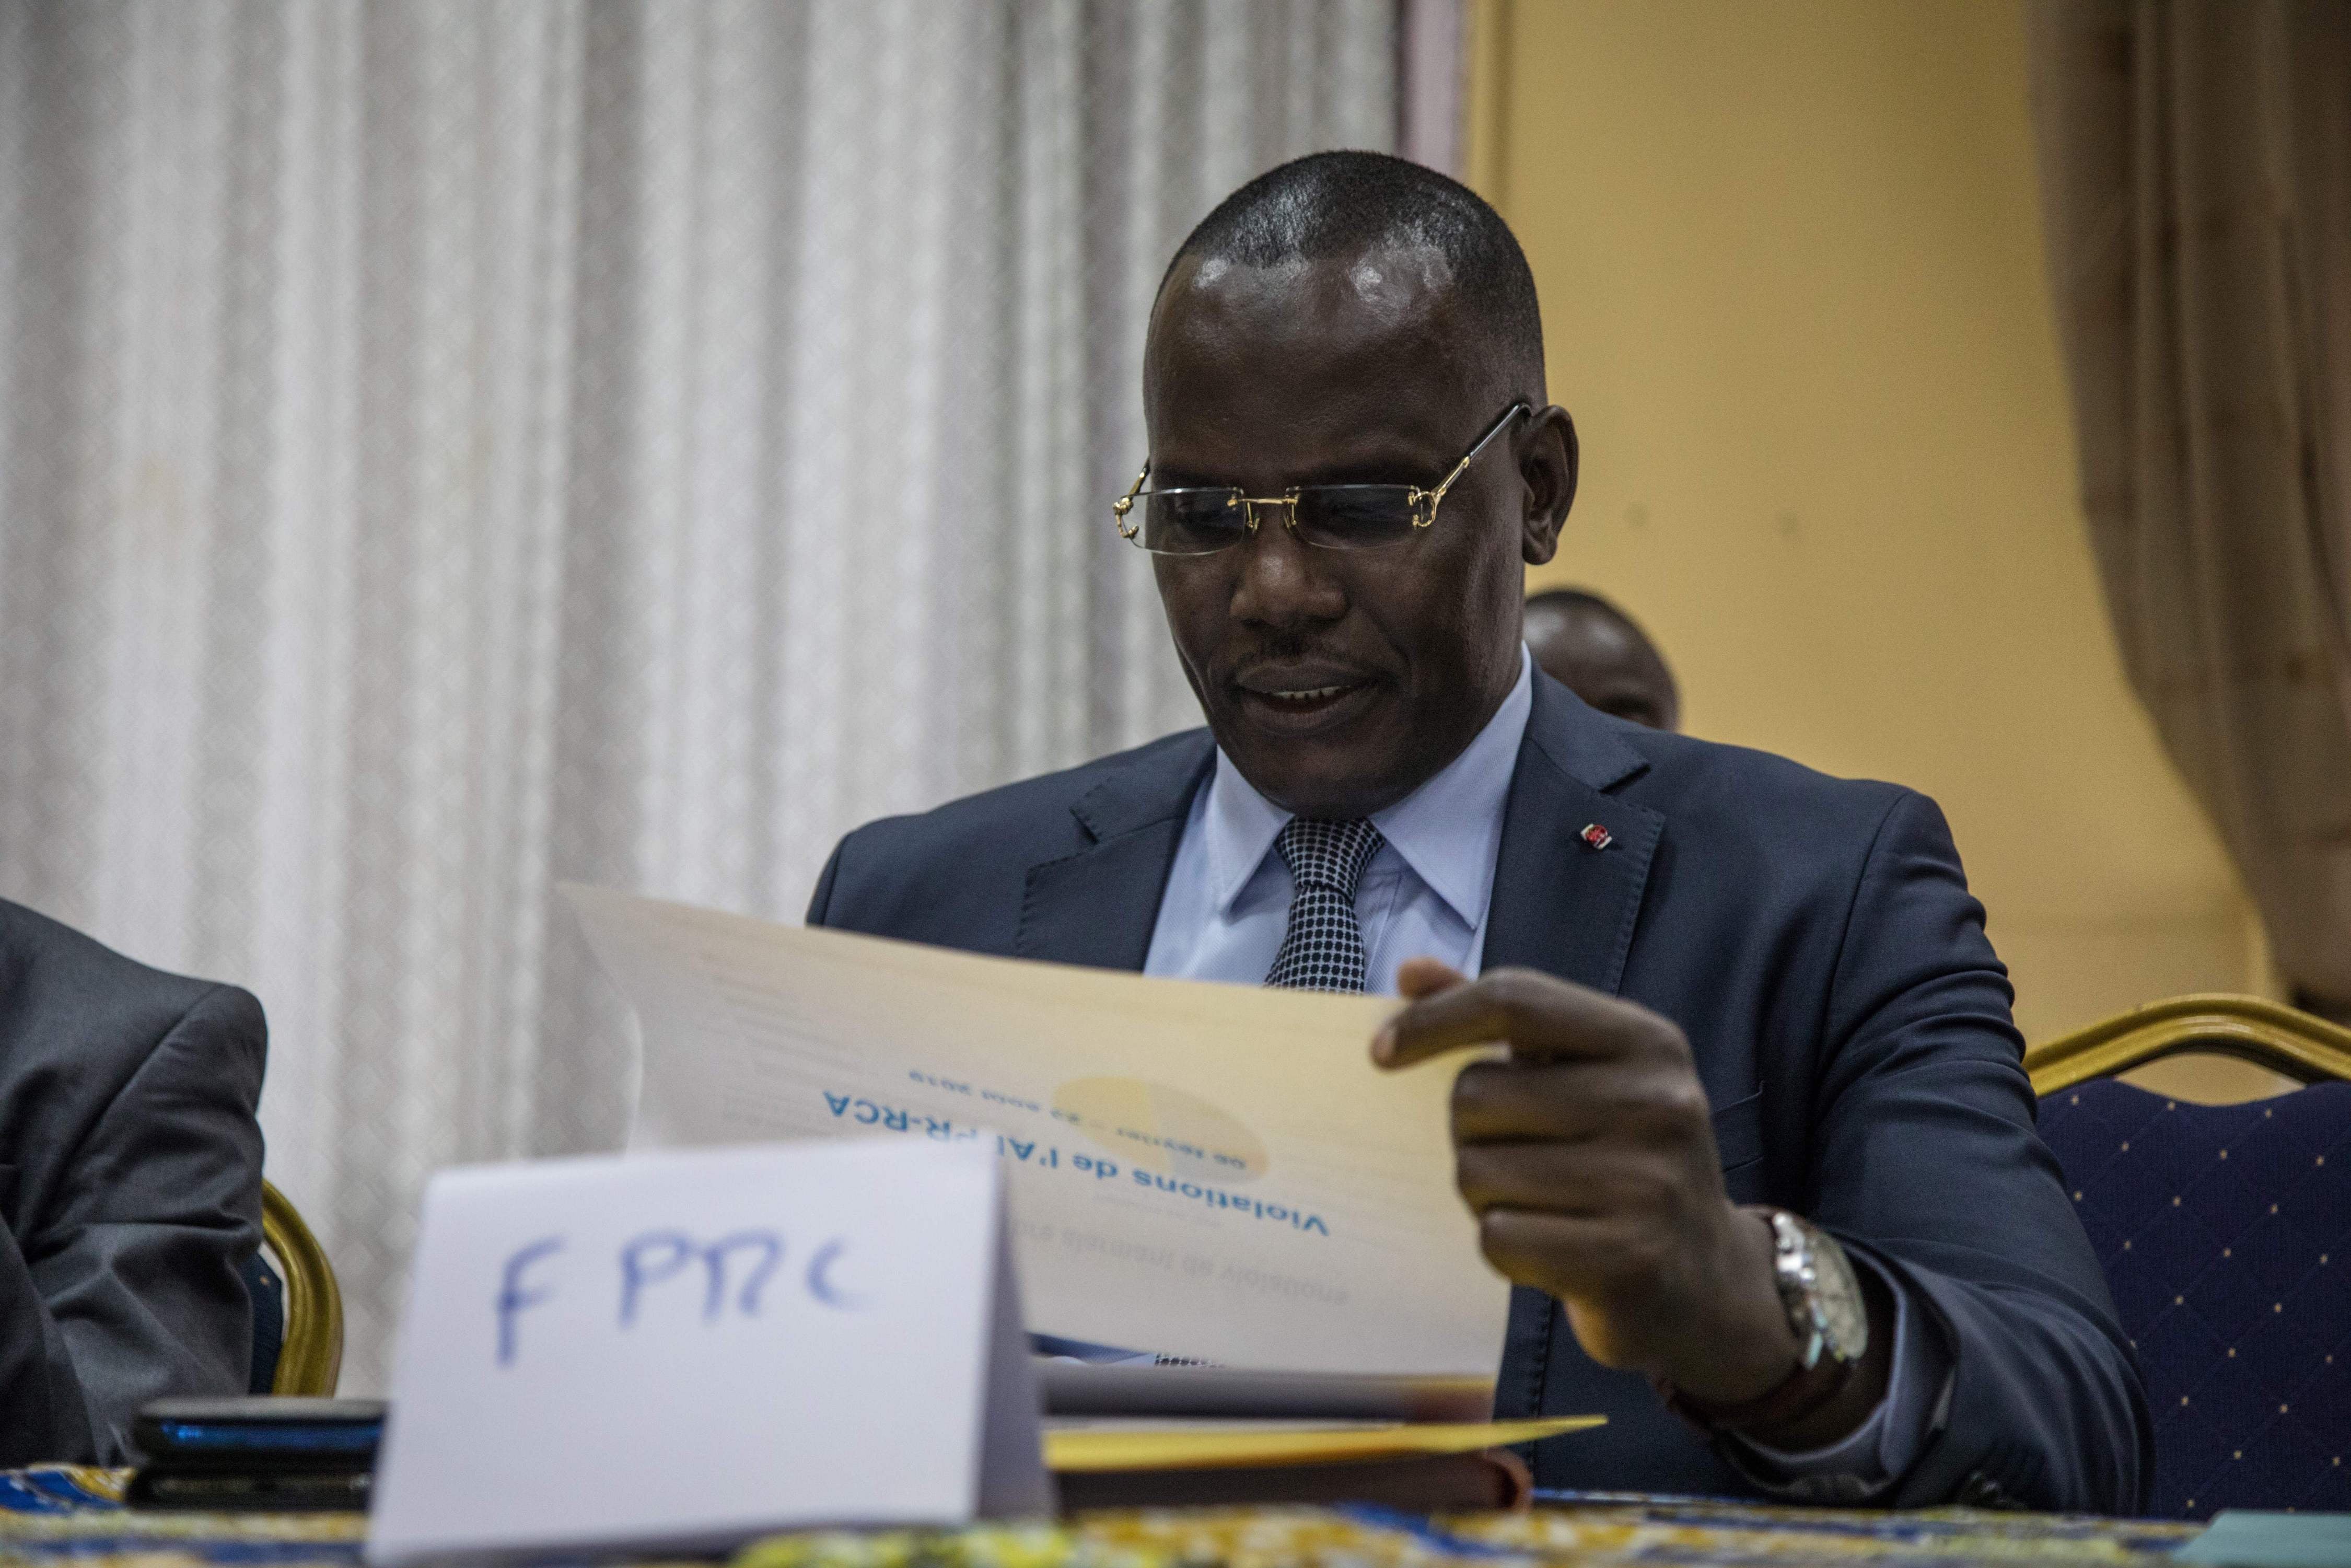 Abdoulaye Hissene, one of the leaders of the FPRC (Popular Front for the Rebirth of Central African Republic) armed group, reads a report on the breaches of the Khartoum agreements by armed groups, in Bangui, on August 23, 2019. 